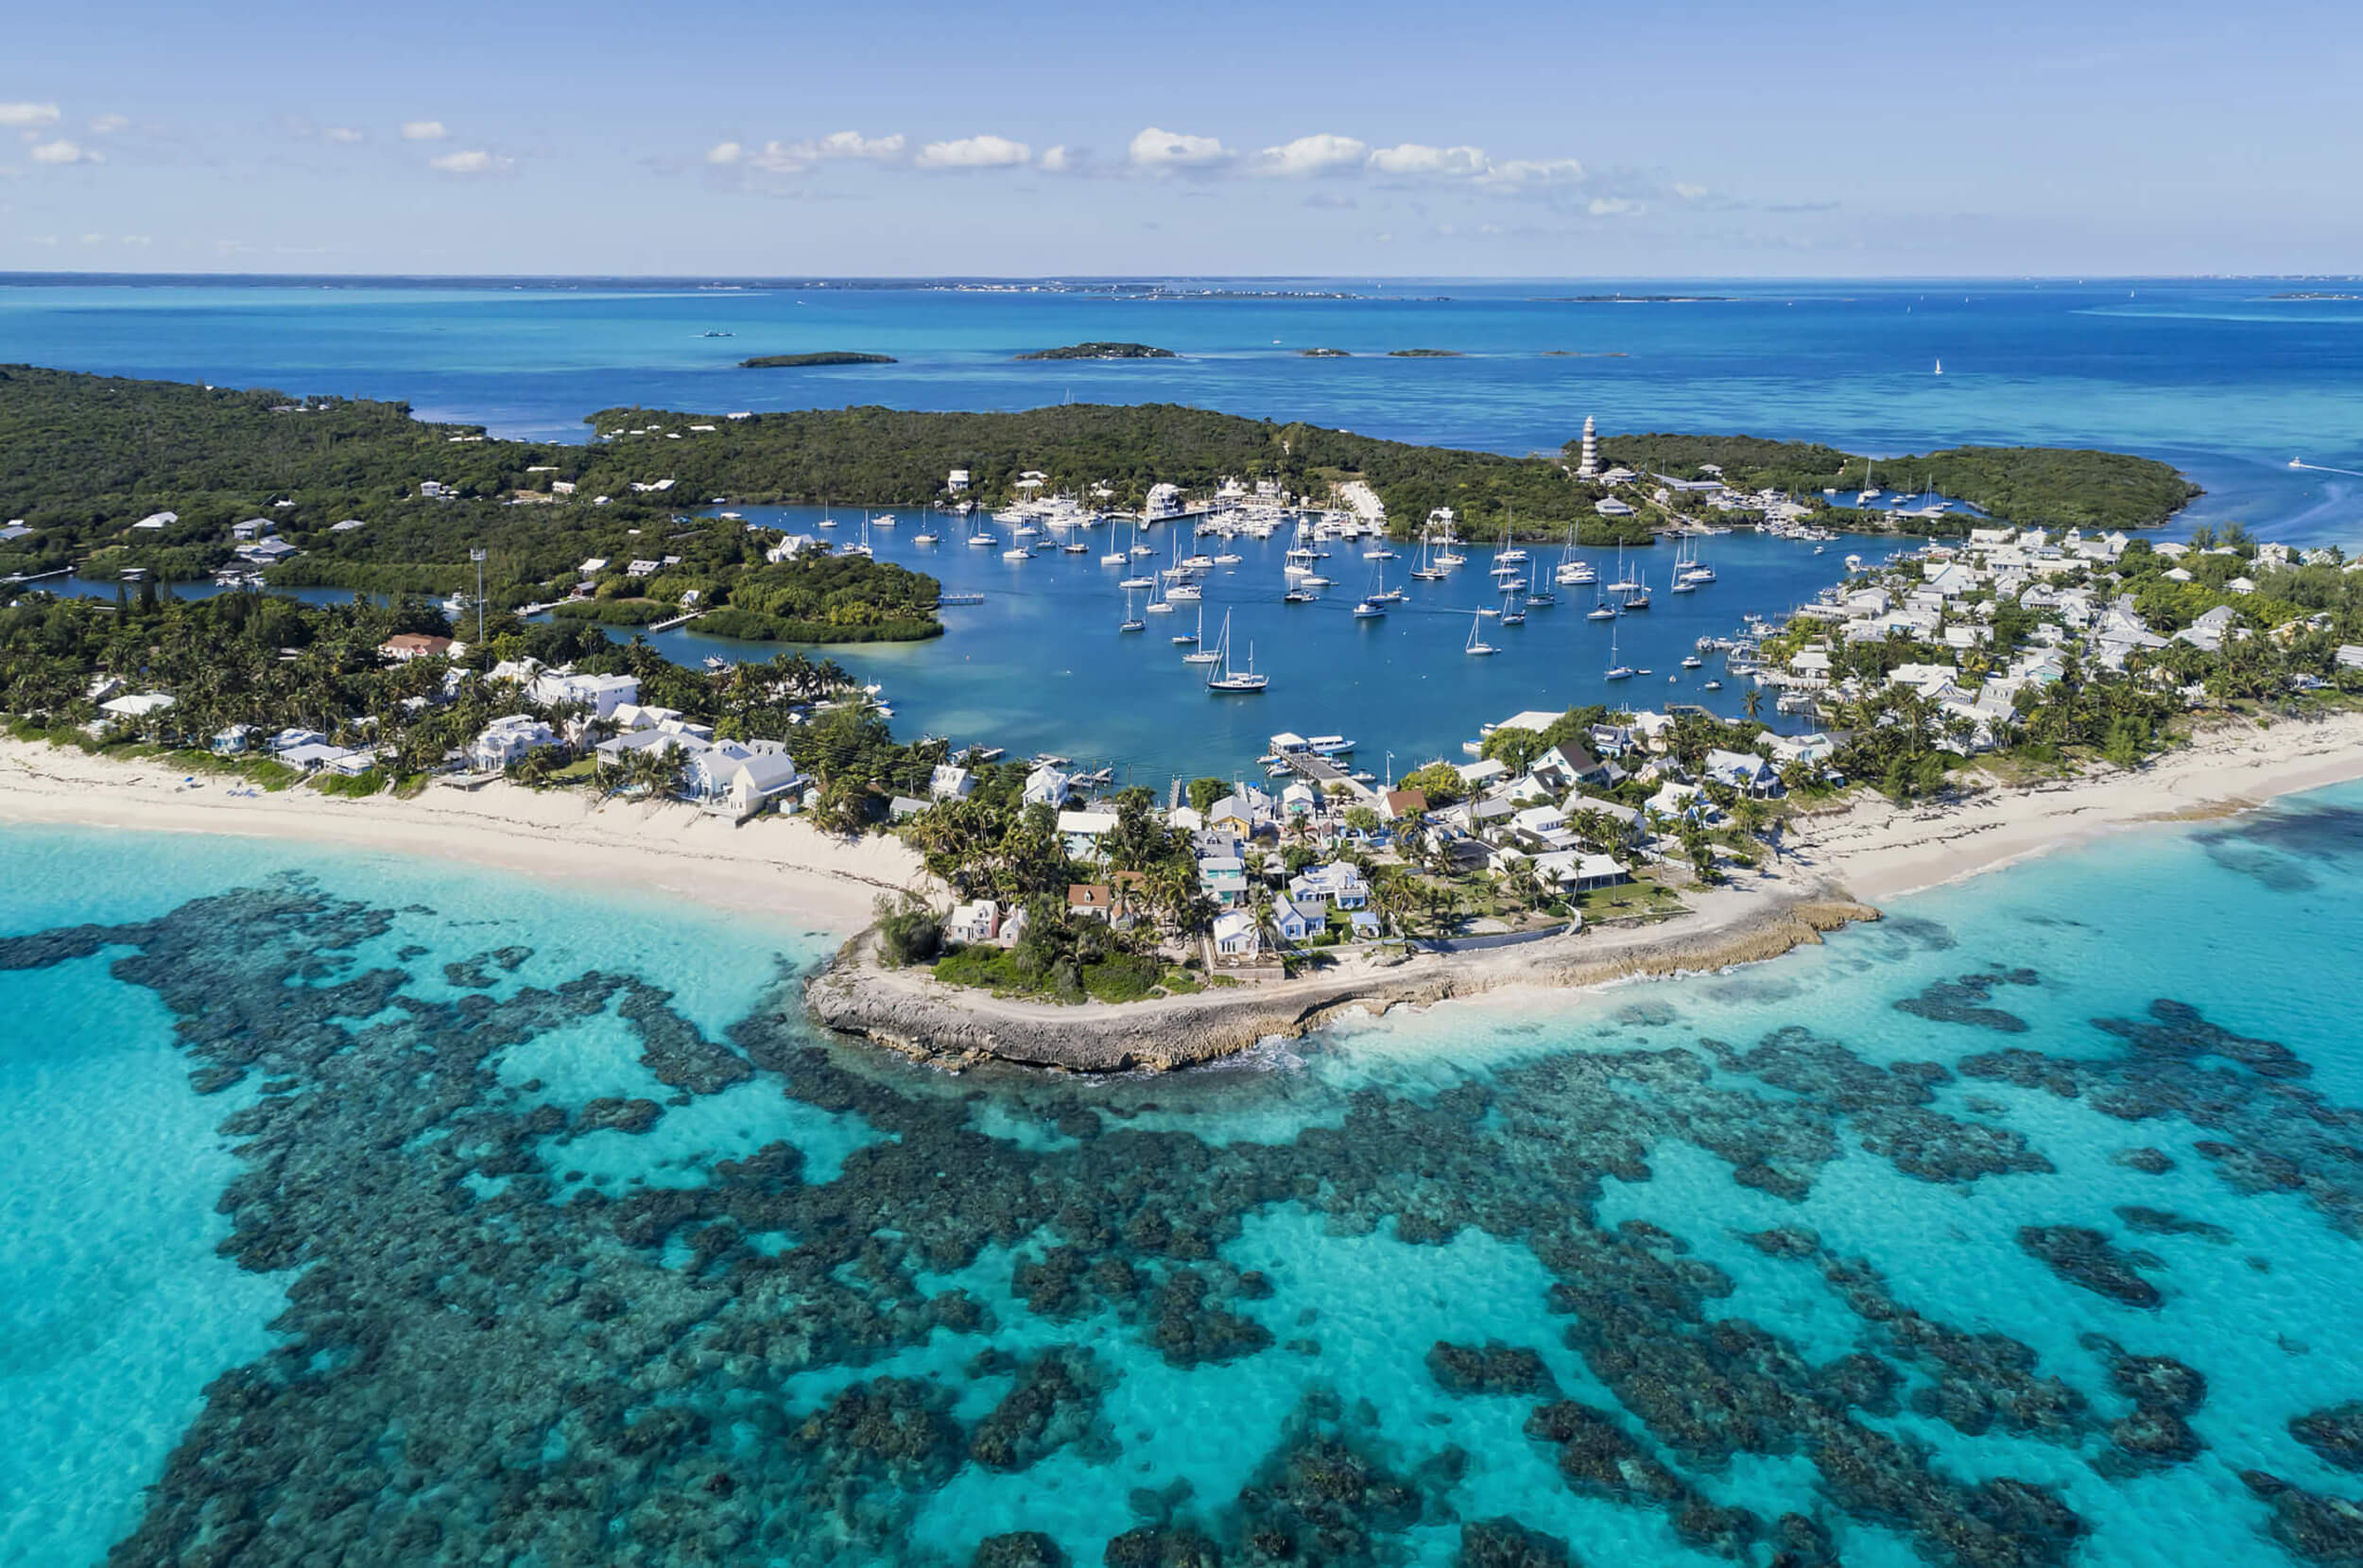 Aerial shot of boats and yachts at The Abaco Club